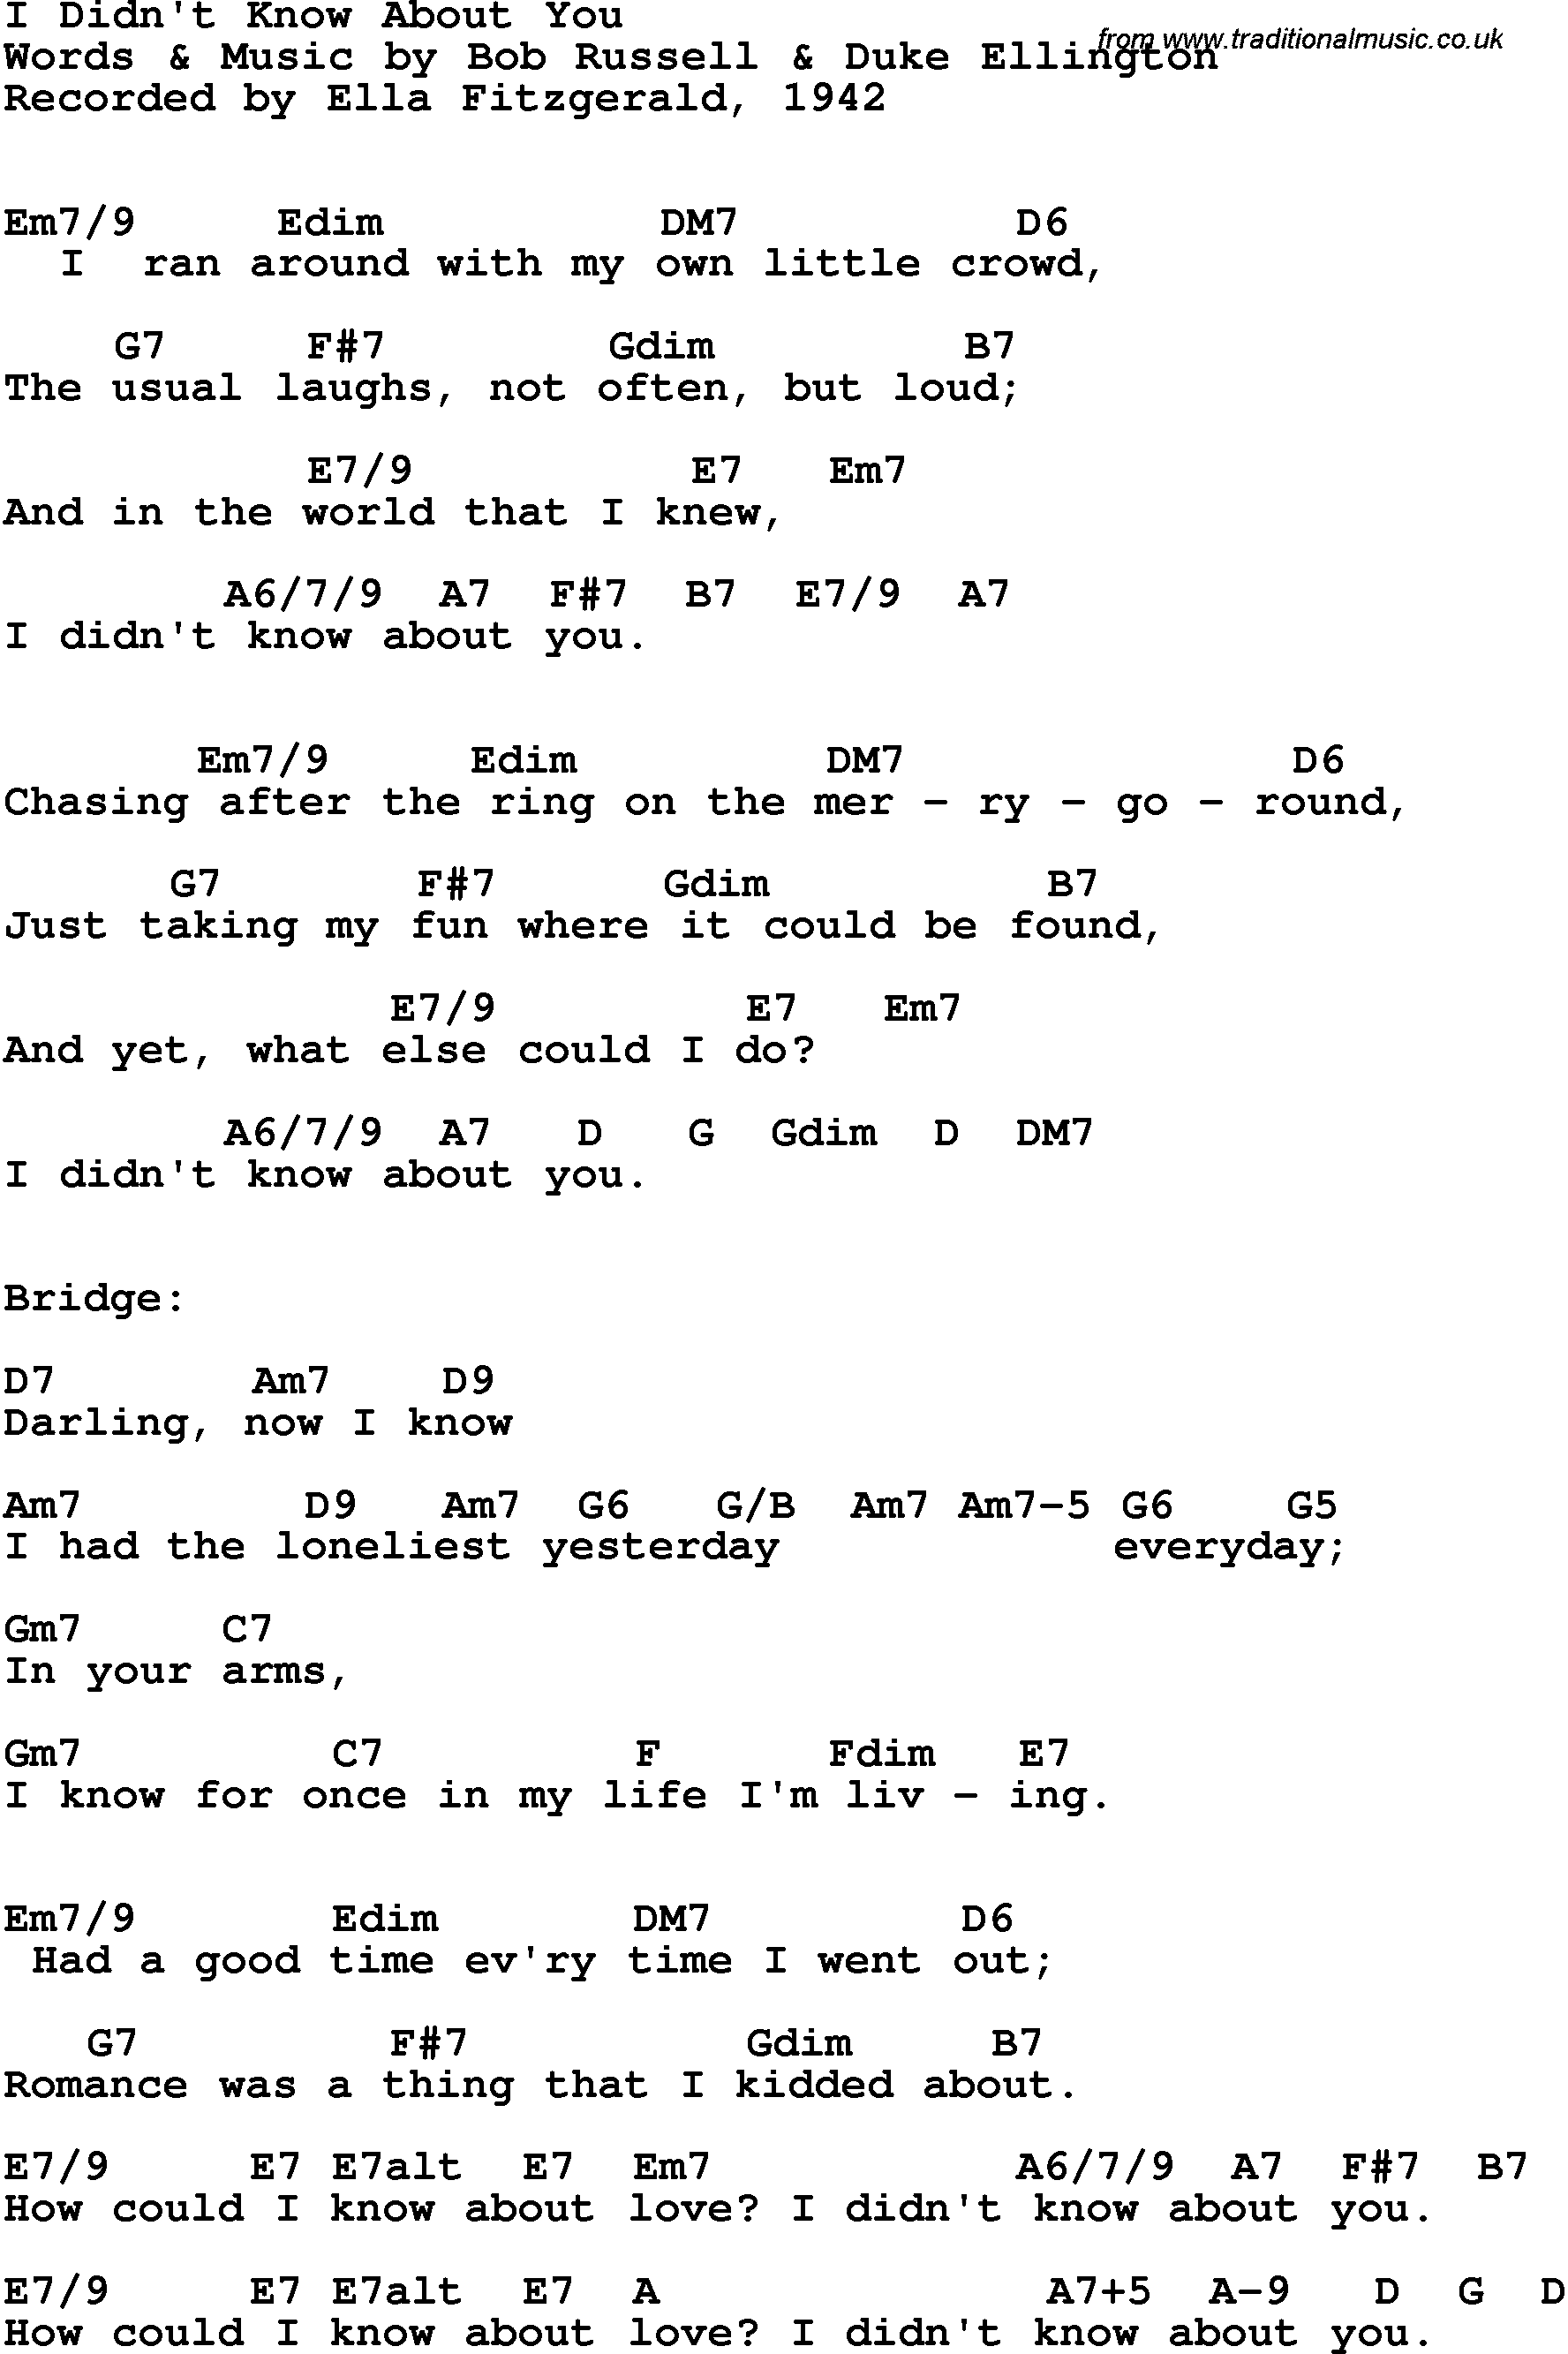 Song Lyrics with guitar chords for I Didn't Know About You - Ella Fitzgerald, 1942